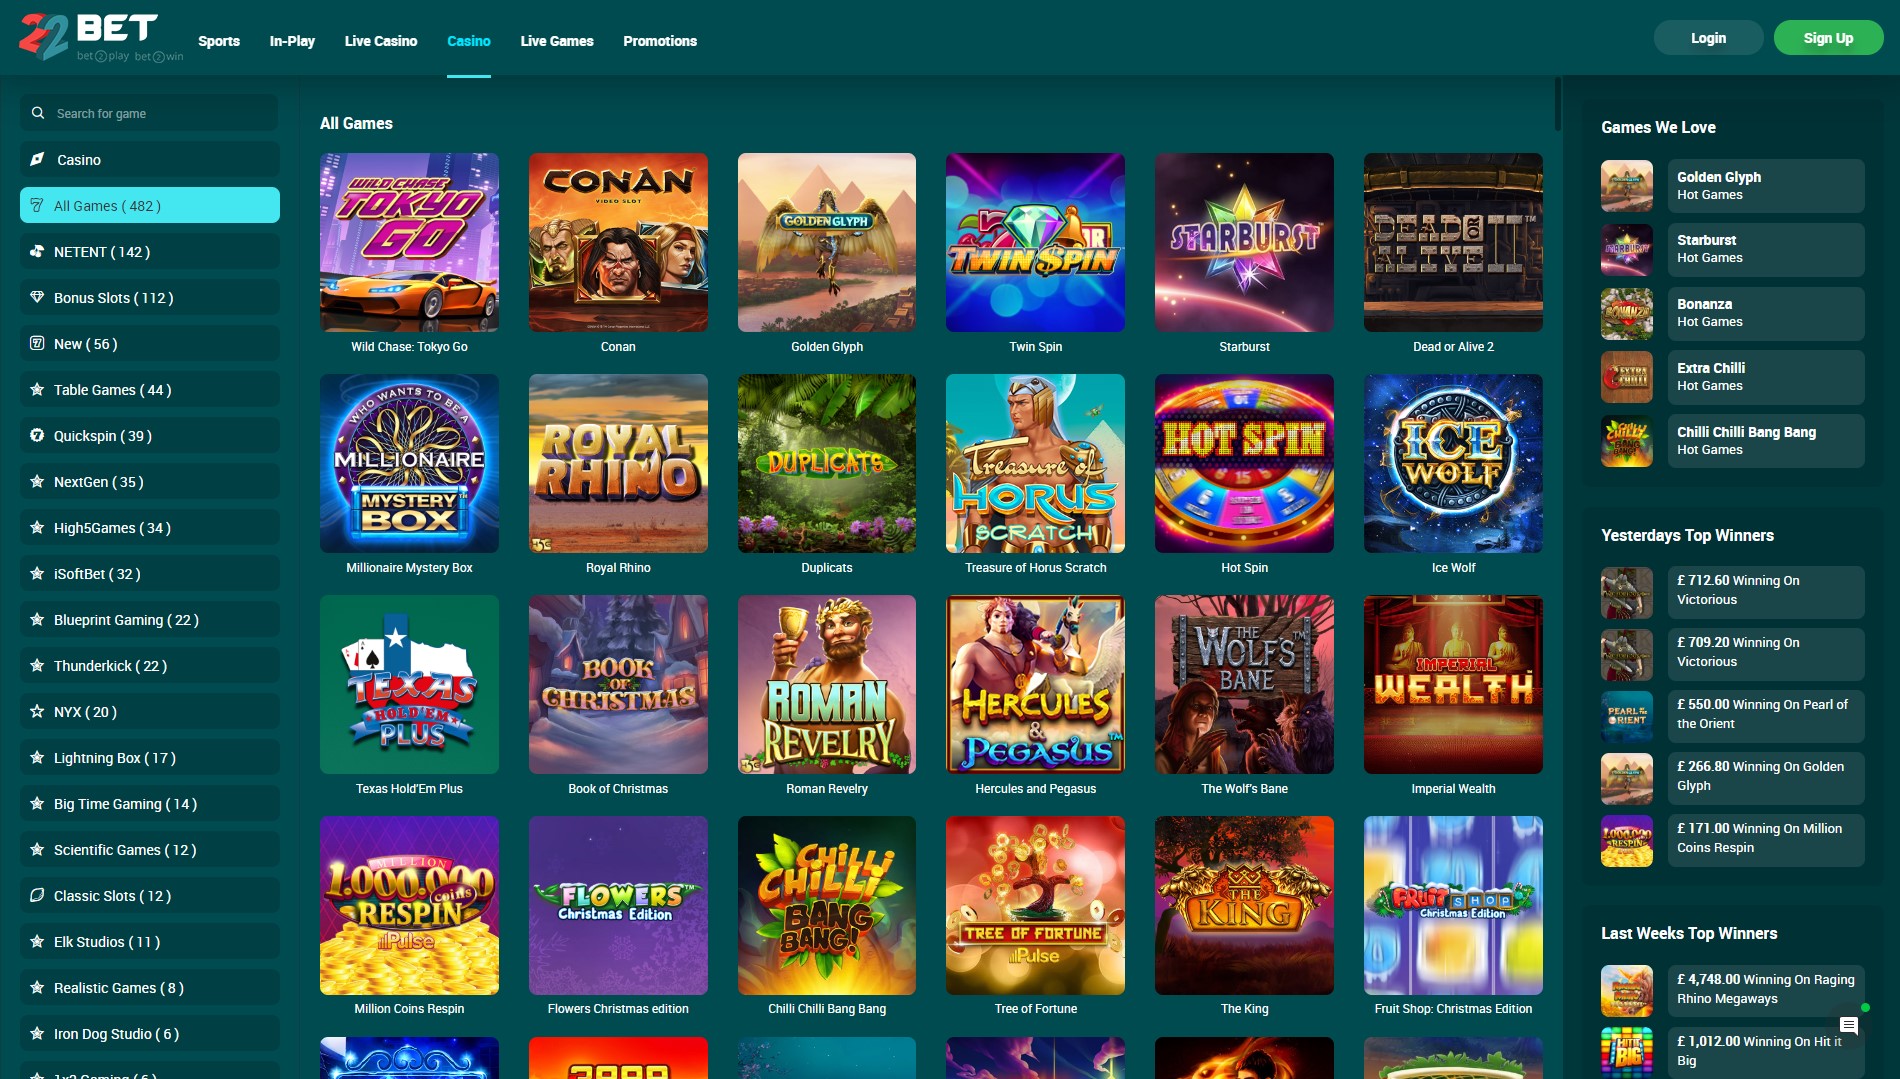 22Bet online casino reviews and slots 